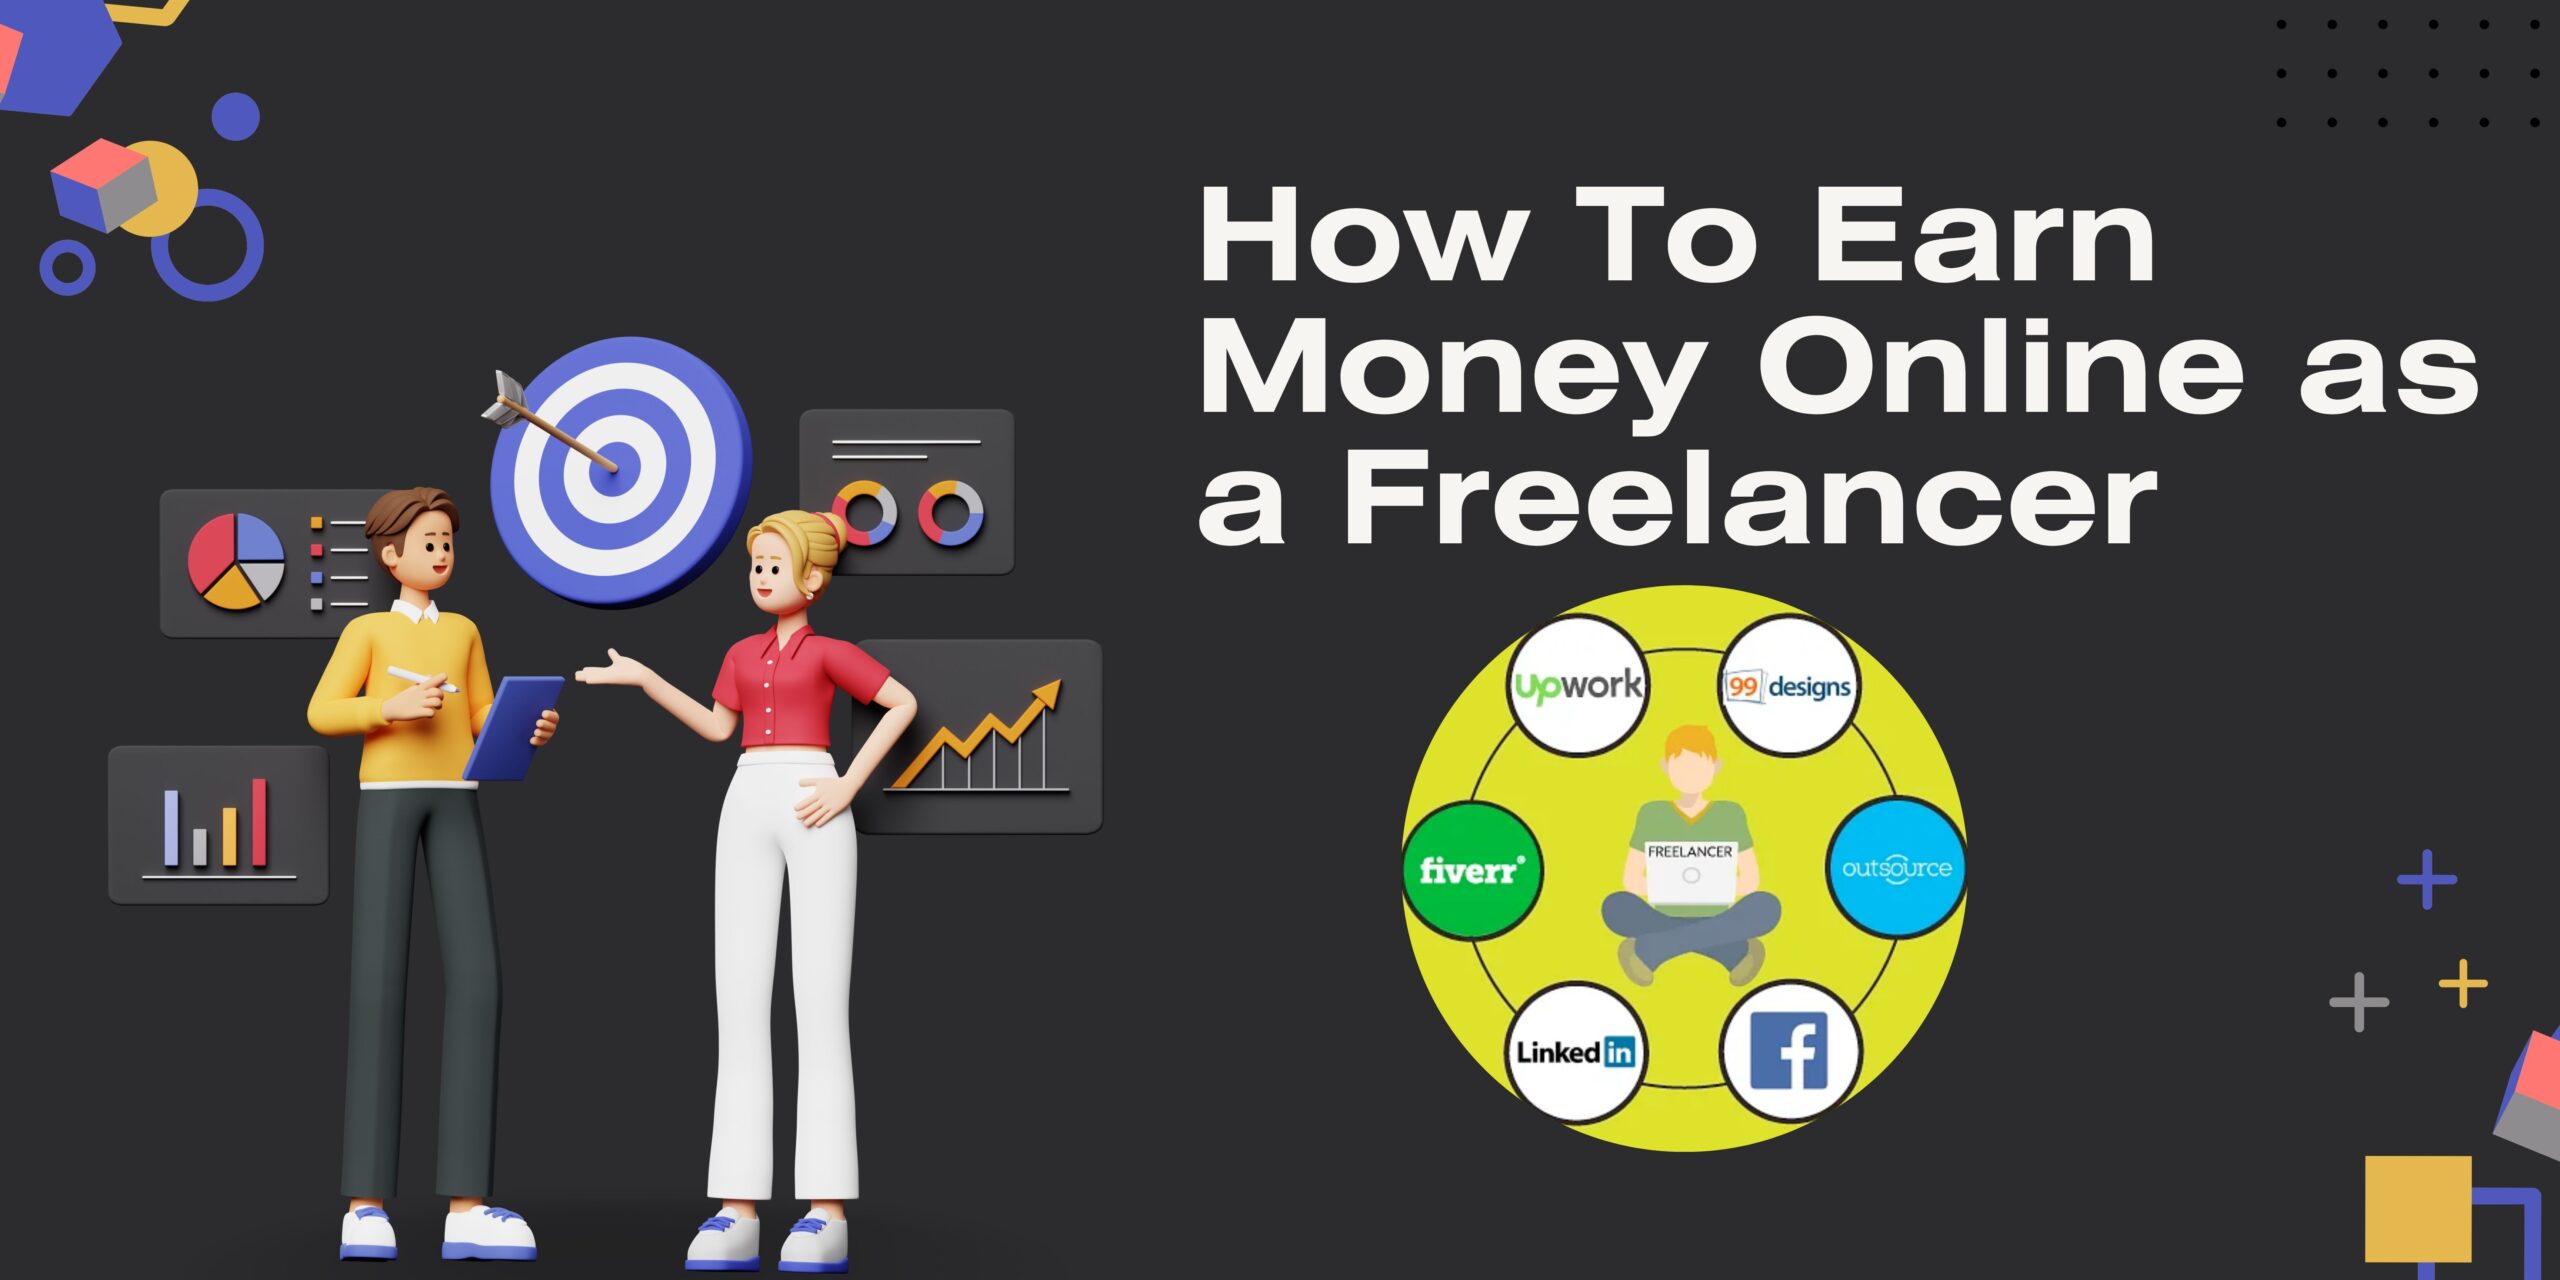 How To Earn Money Online as a Freelancer